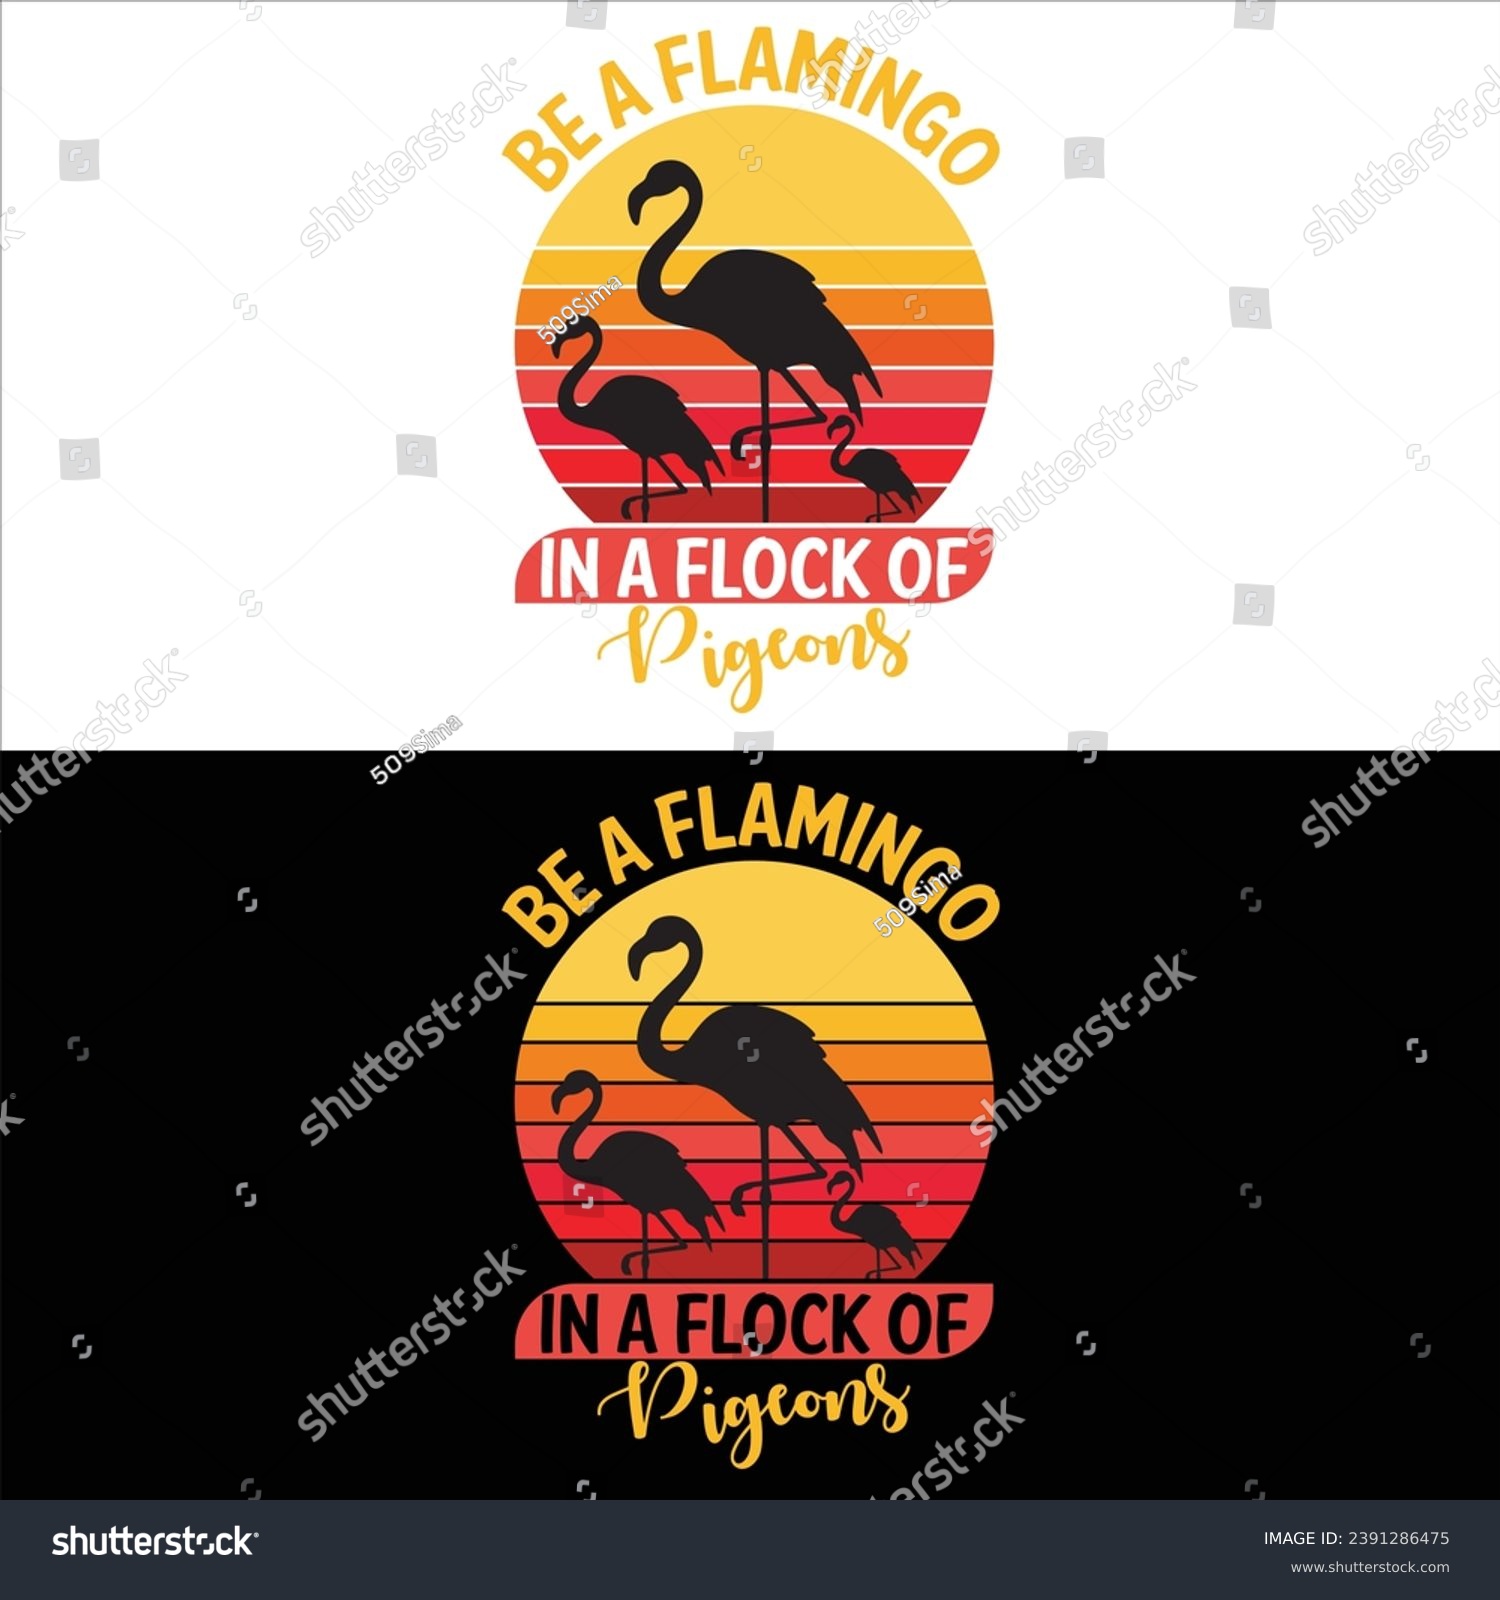 SVG of BE A FLAMINGO IN A FLOCK OF PIGEONS-FLAMINGO T-SHIRT DESIGN svg